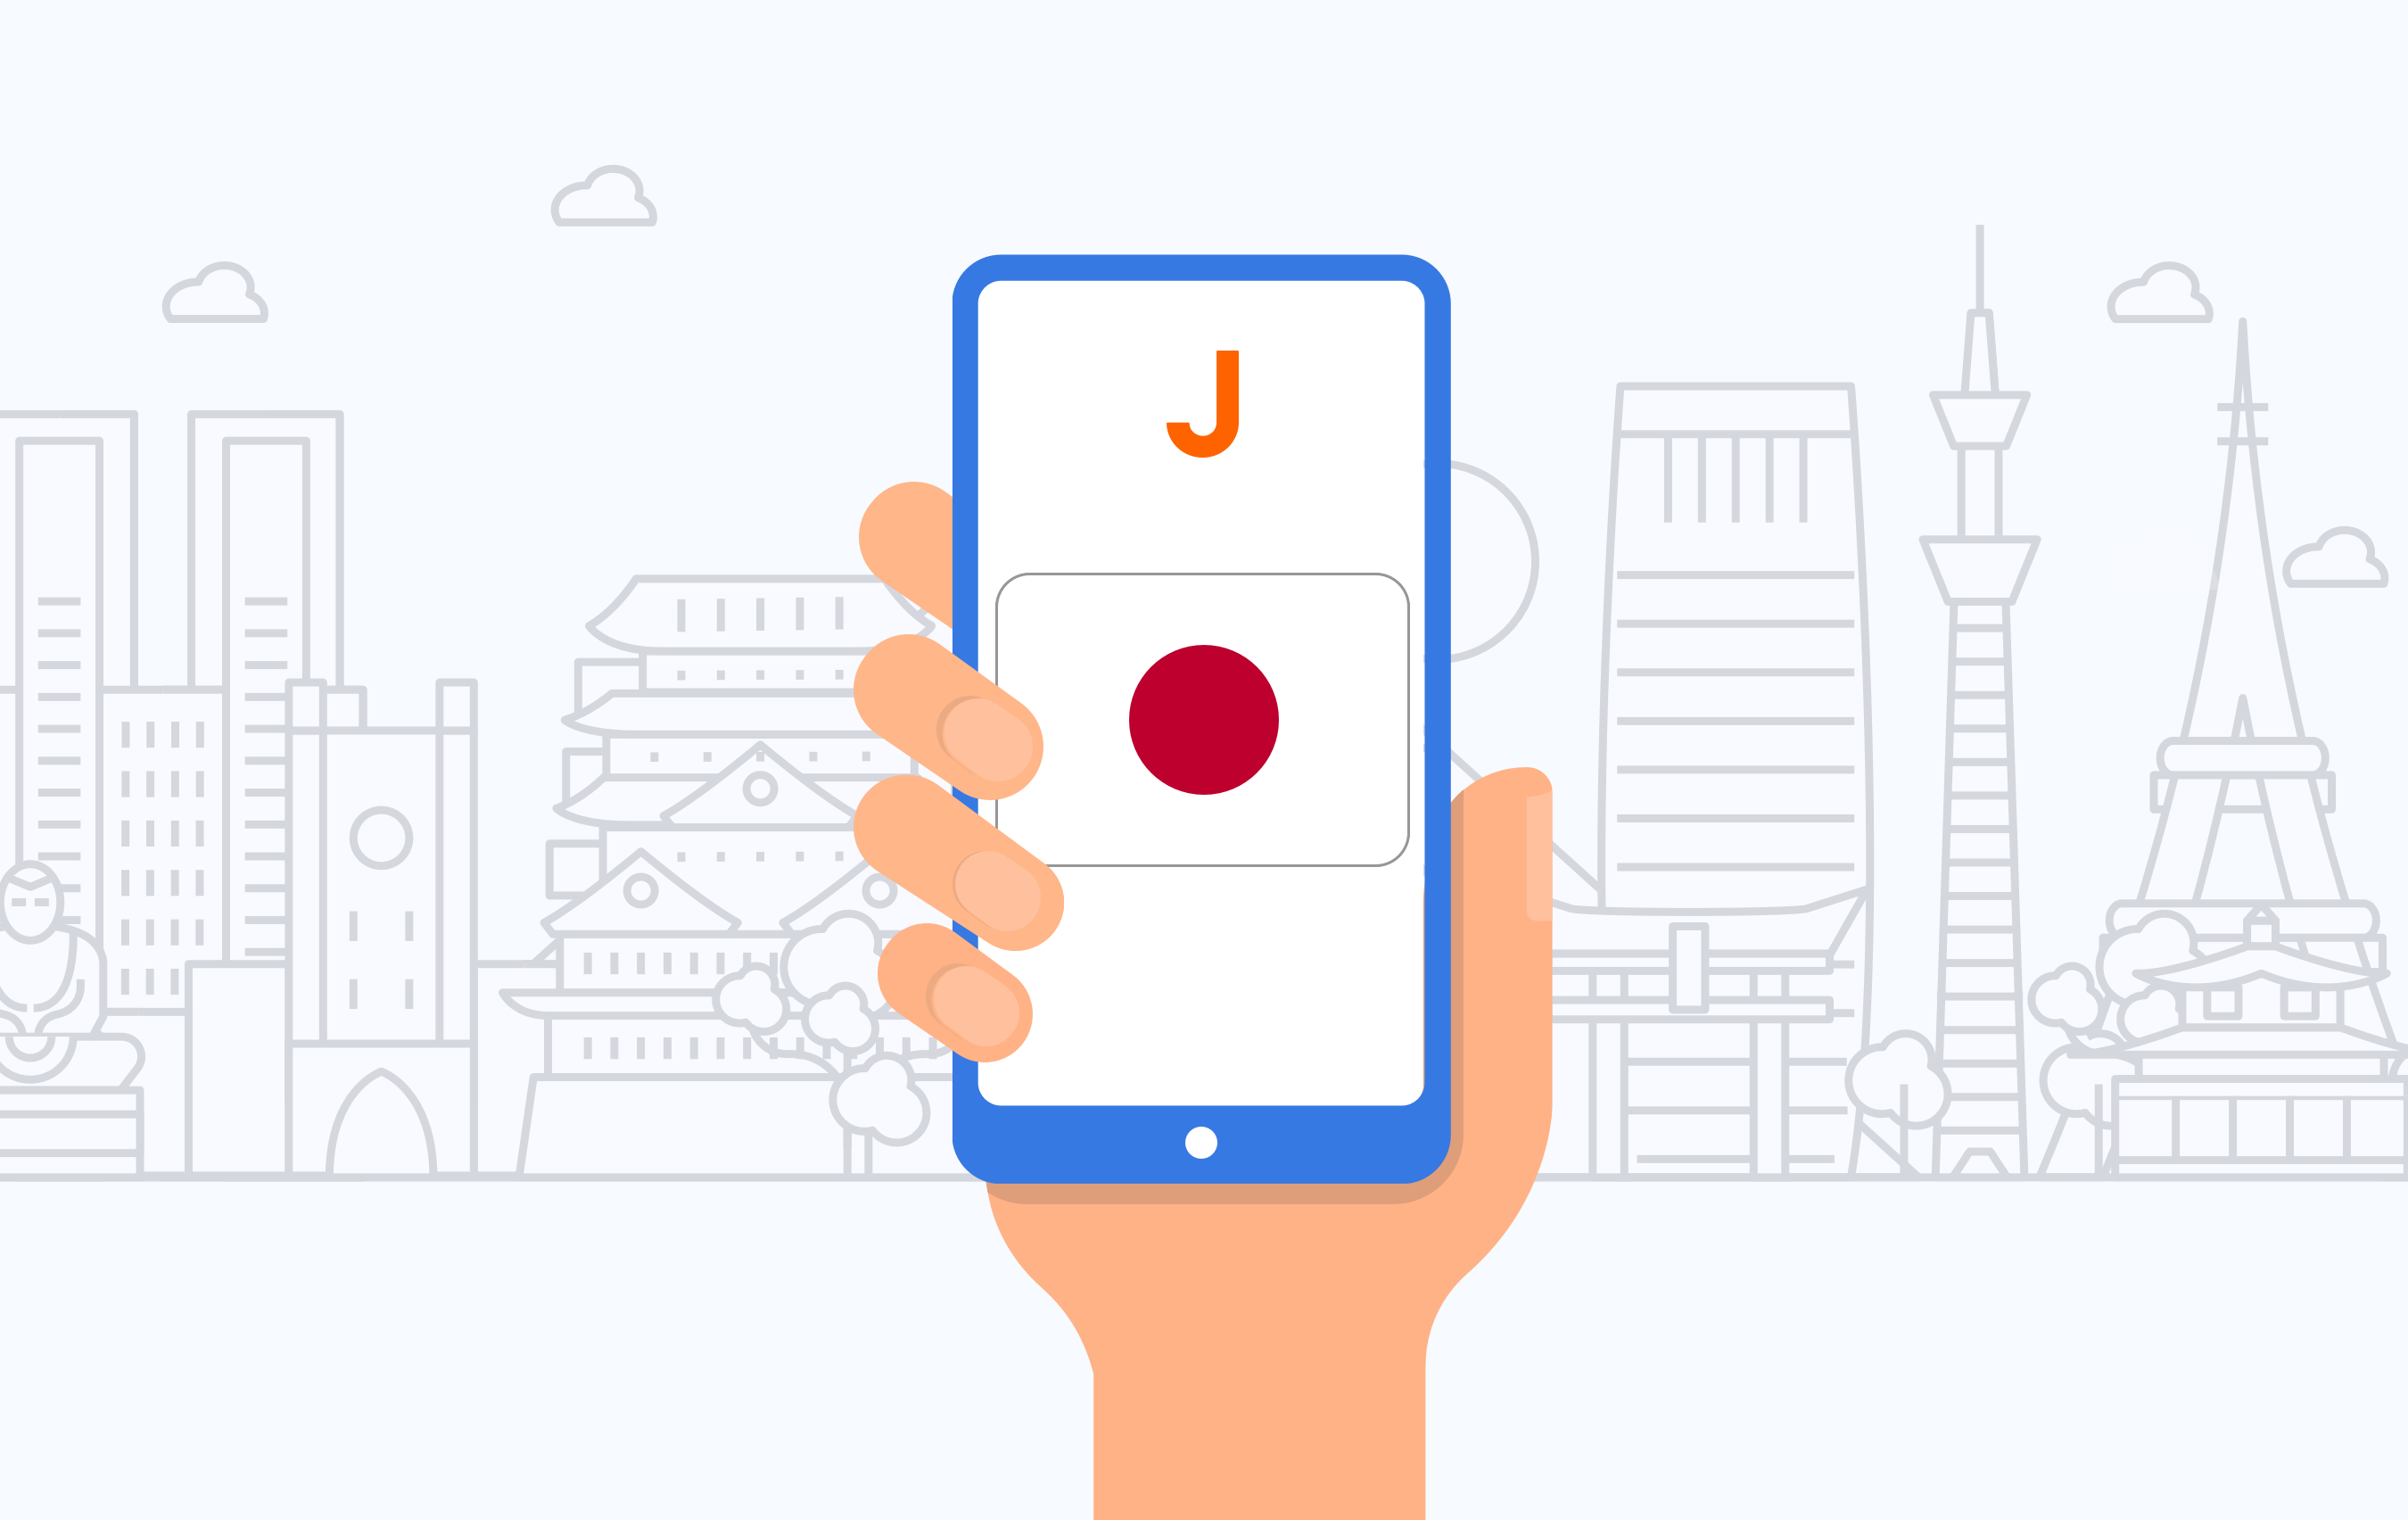 How to use Jeton Wallet in Japan